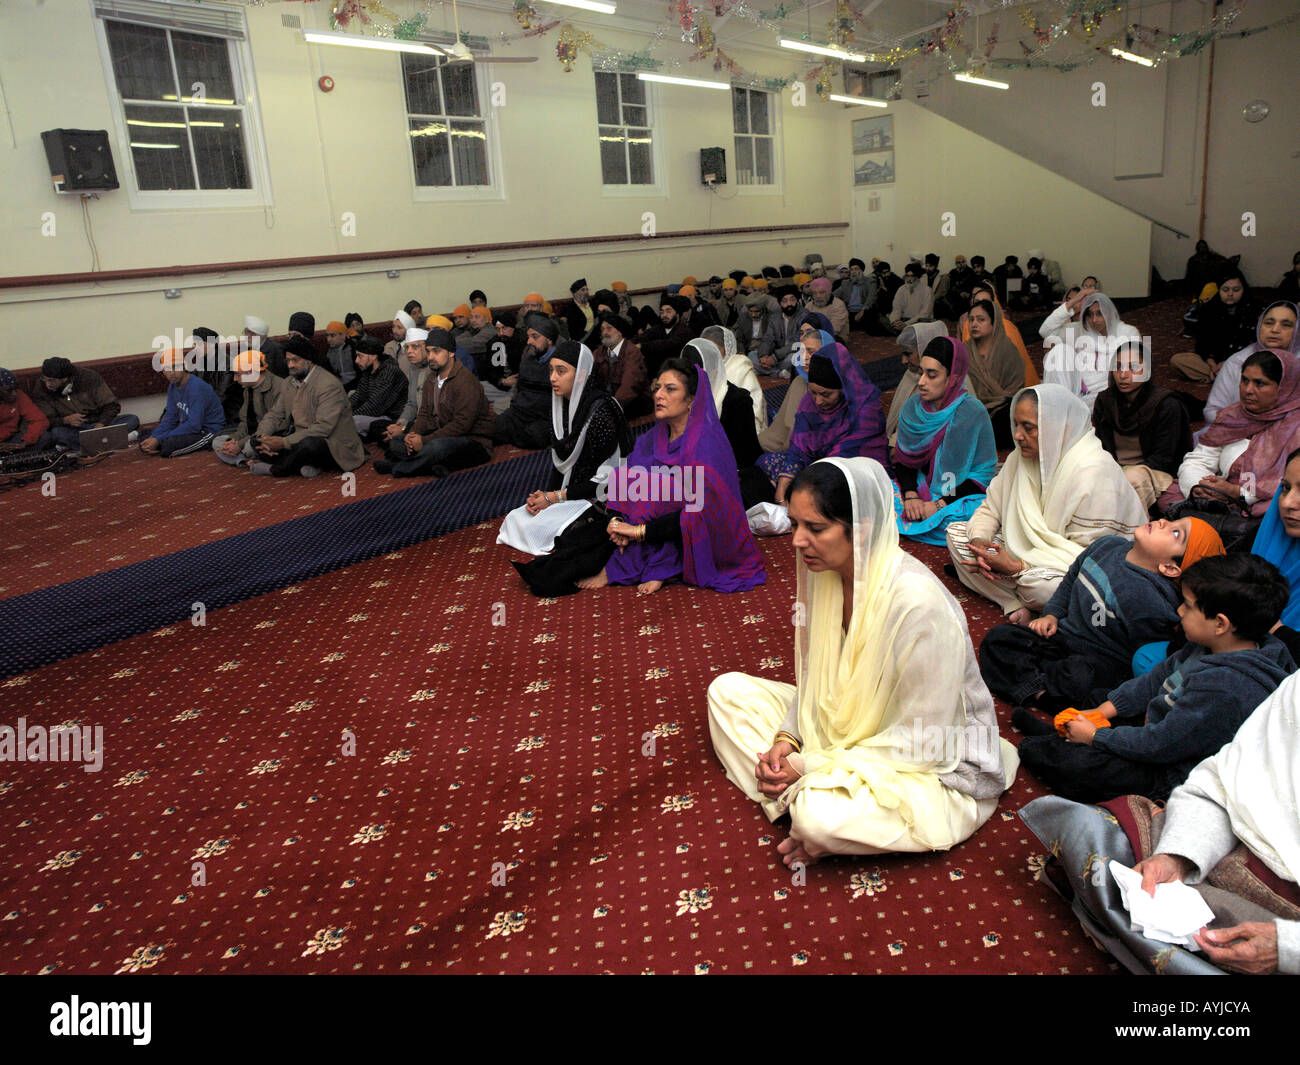 Khalsa Centre Tooting London England Congregation Divided in Gurdwara Men on Right Women on Left Stock Photo